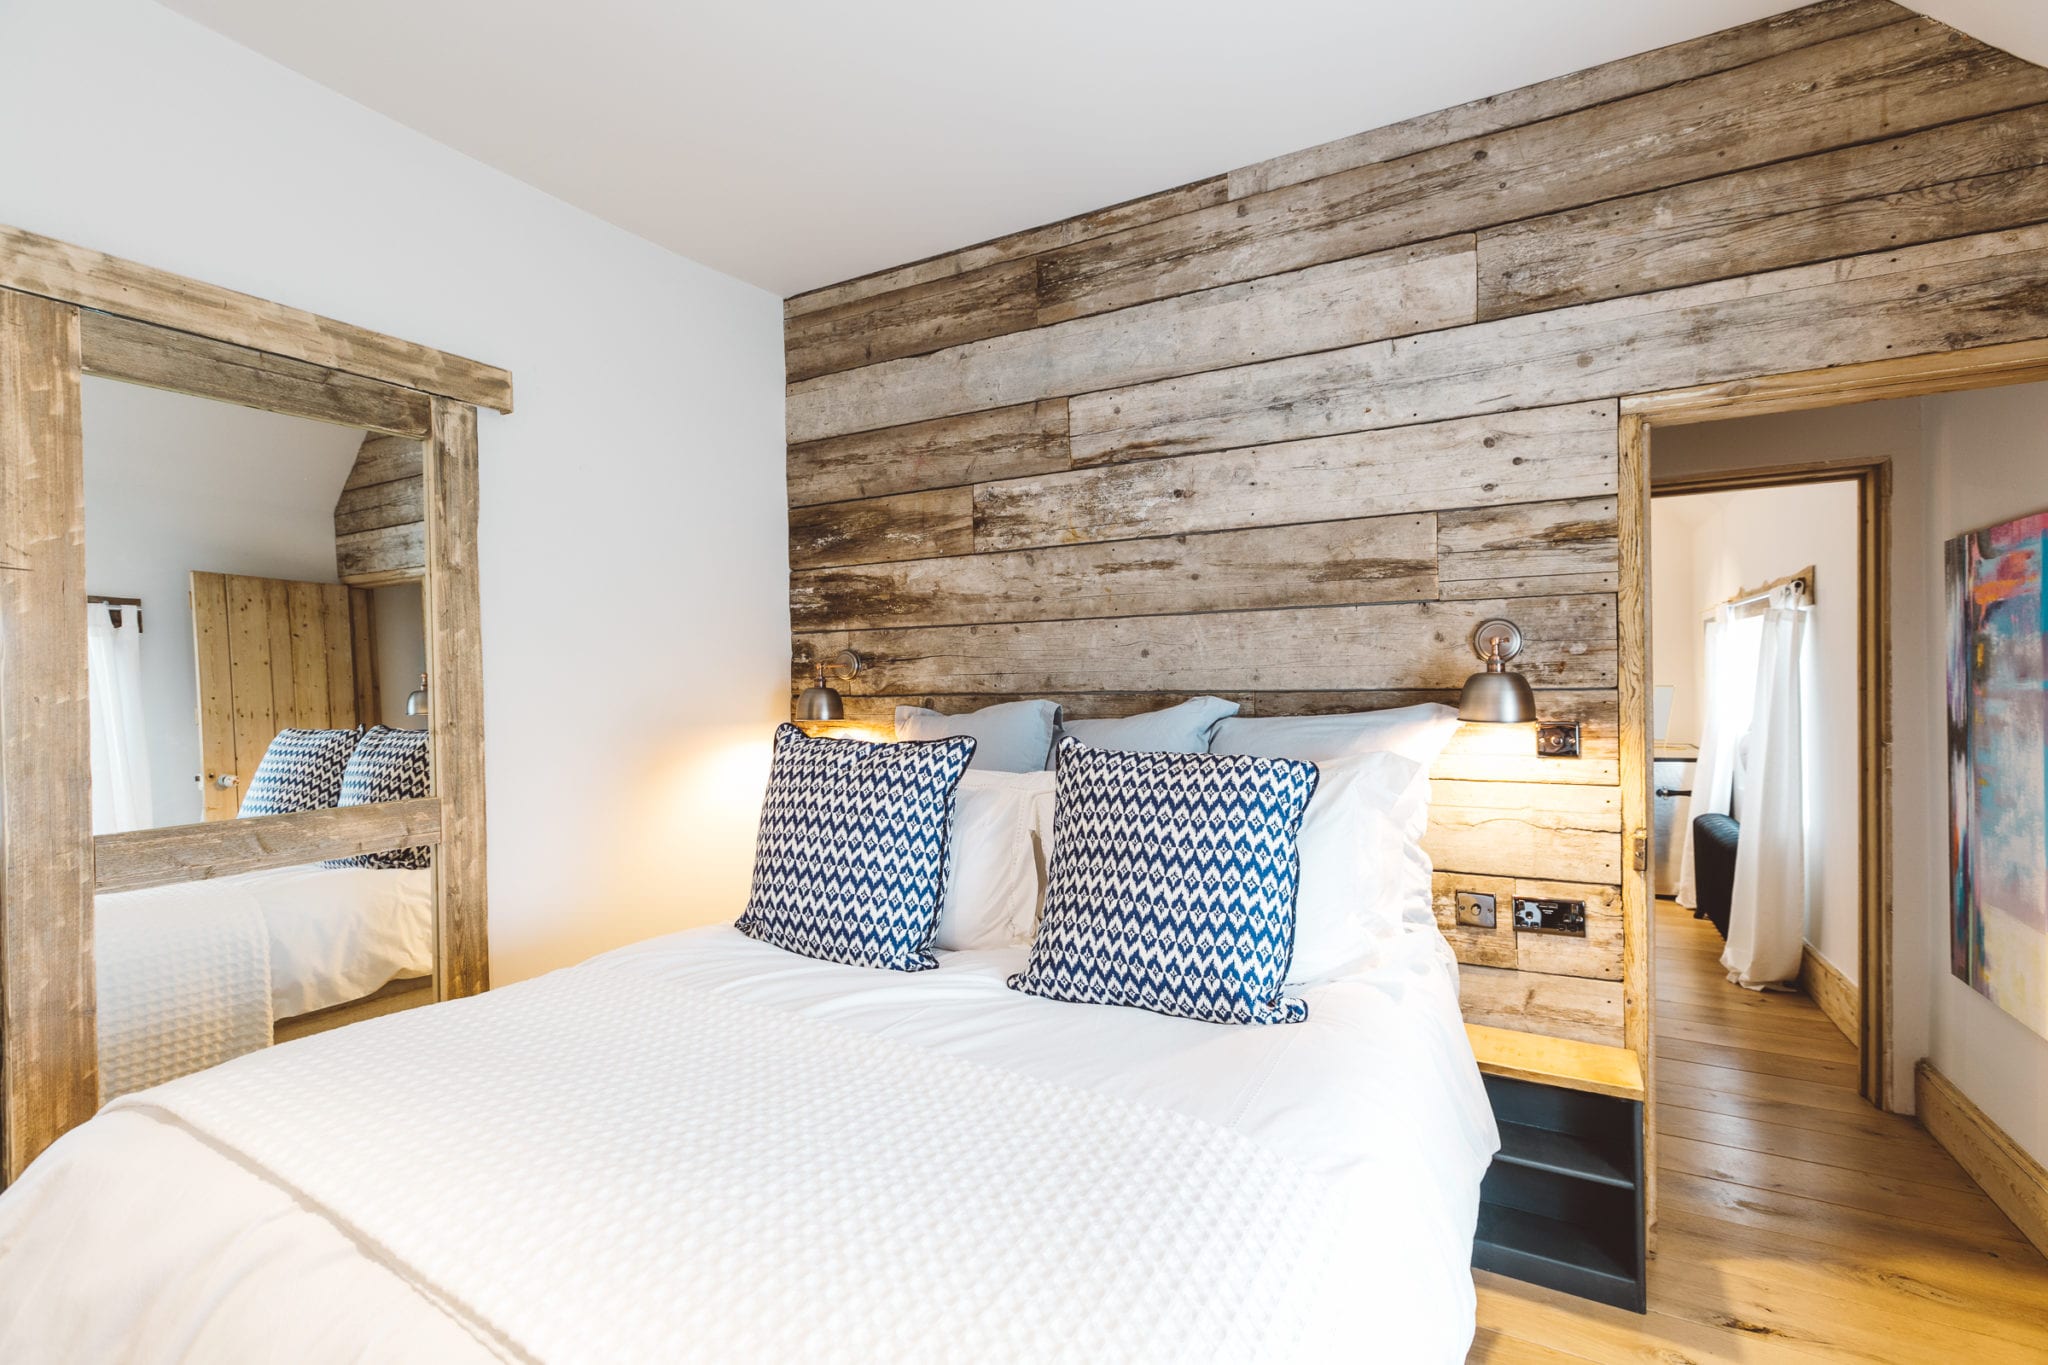 A bedroom with a double bed and exposed wood cladding